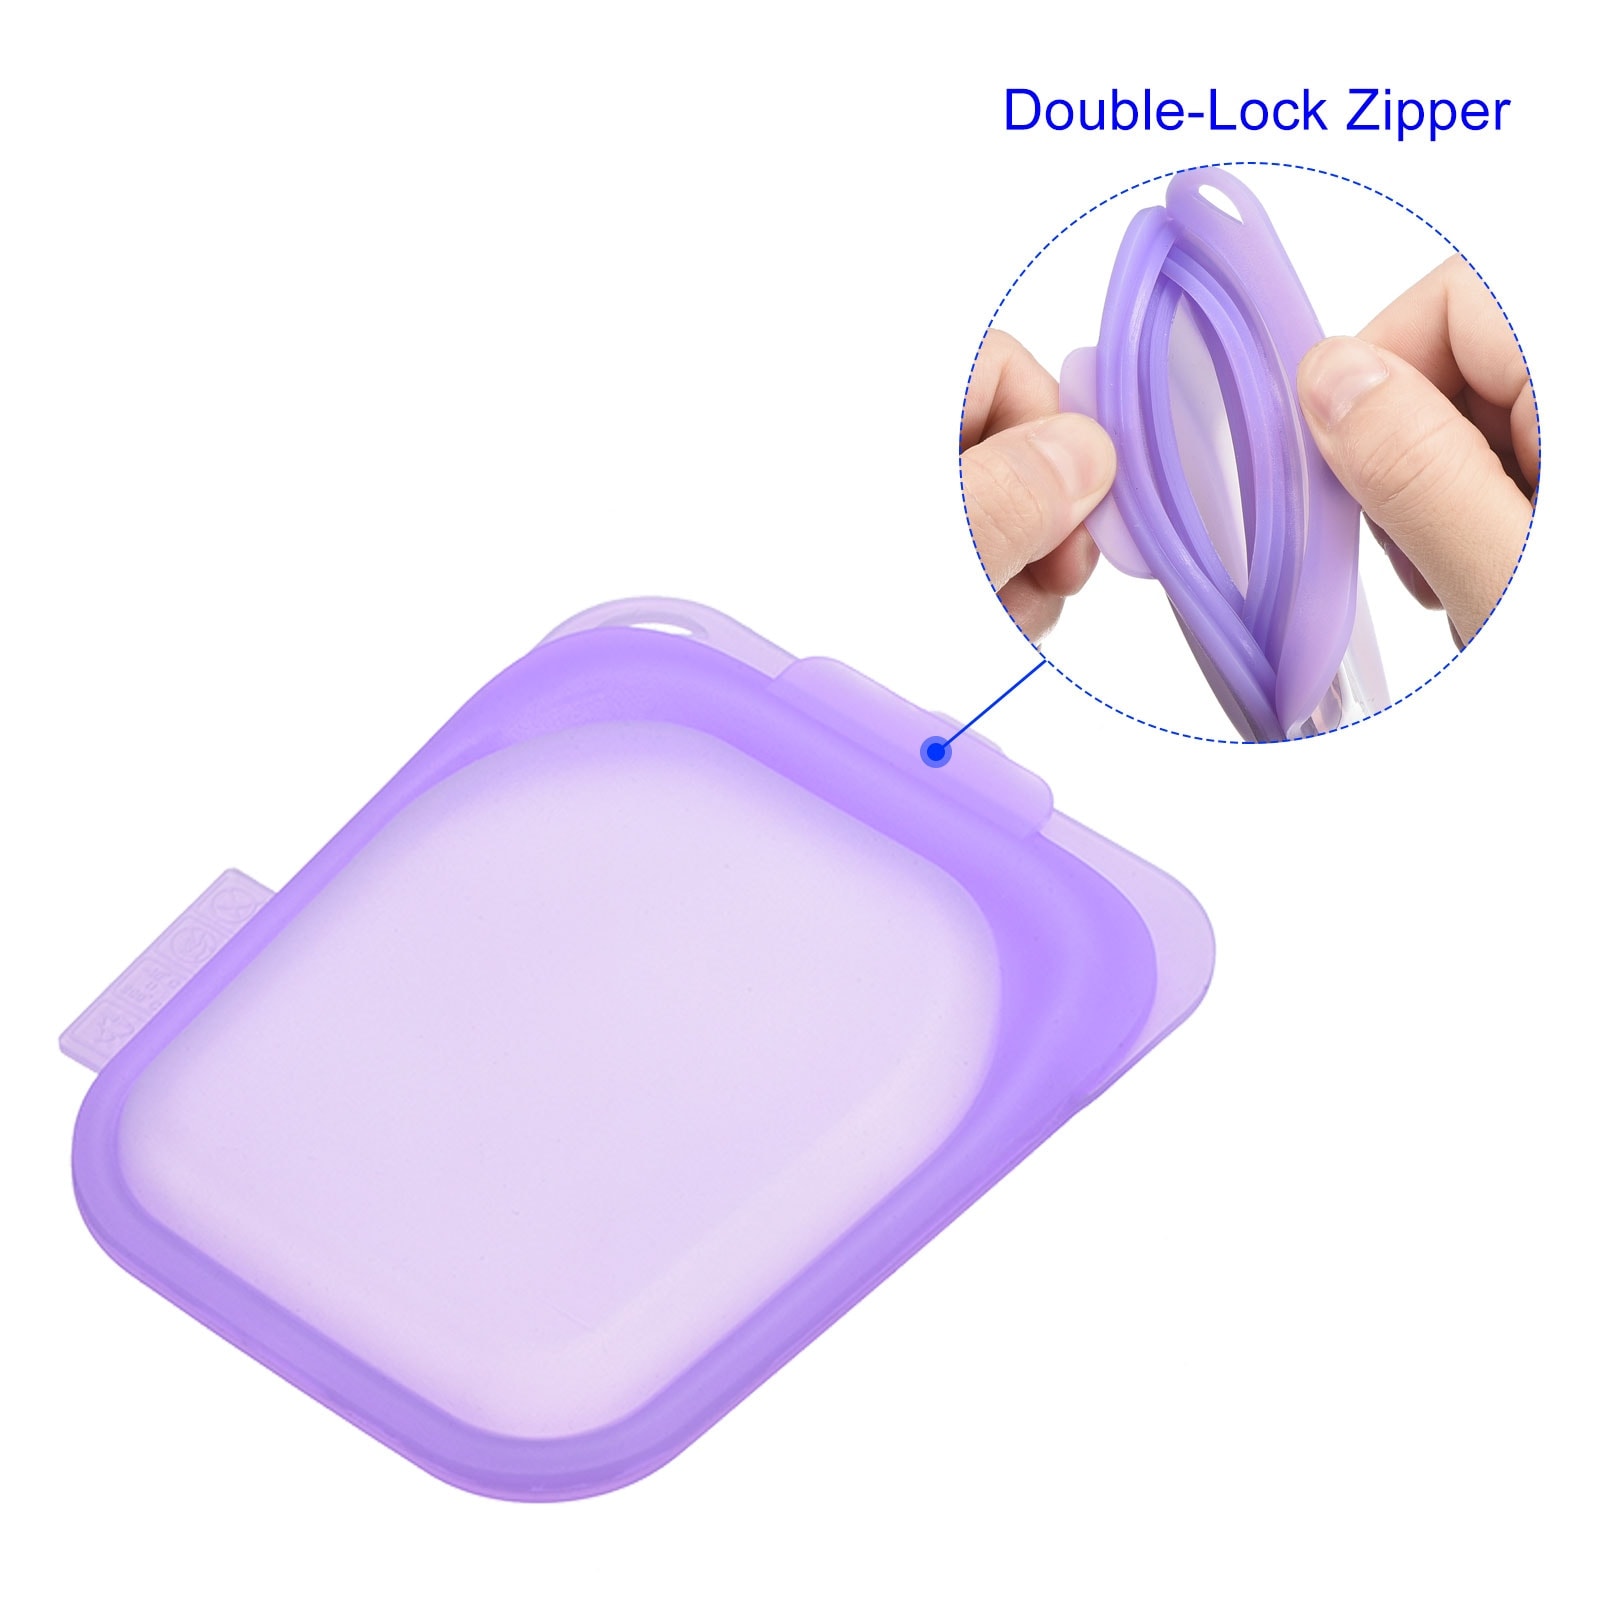 https://ak1.ostkcdn.com/images/products/is/images/direct/742d80ab64f9a1b39f17bda7434db1e2d5a2ad29/Reusable-Food-Storage-Bags-Silicone-Freezer-Bags-Seal-Pouch-Bags-Blue-Small.jpg